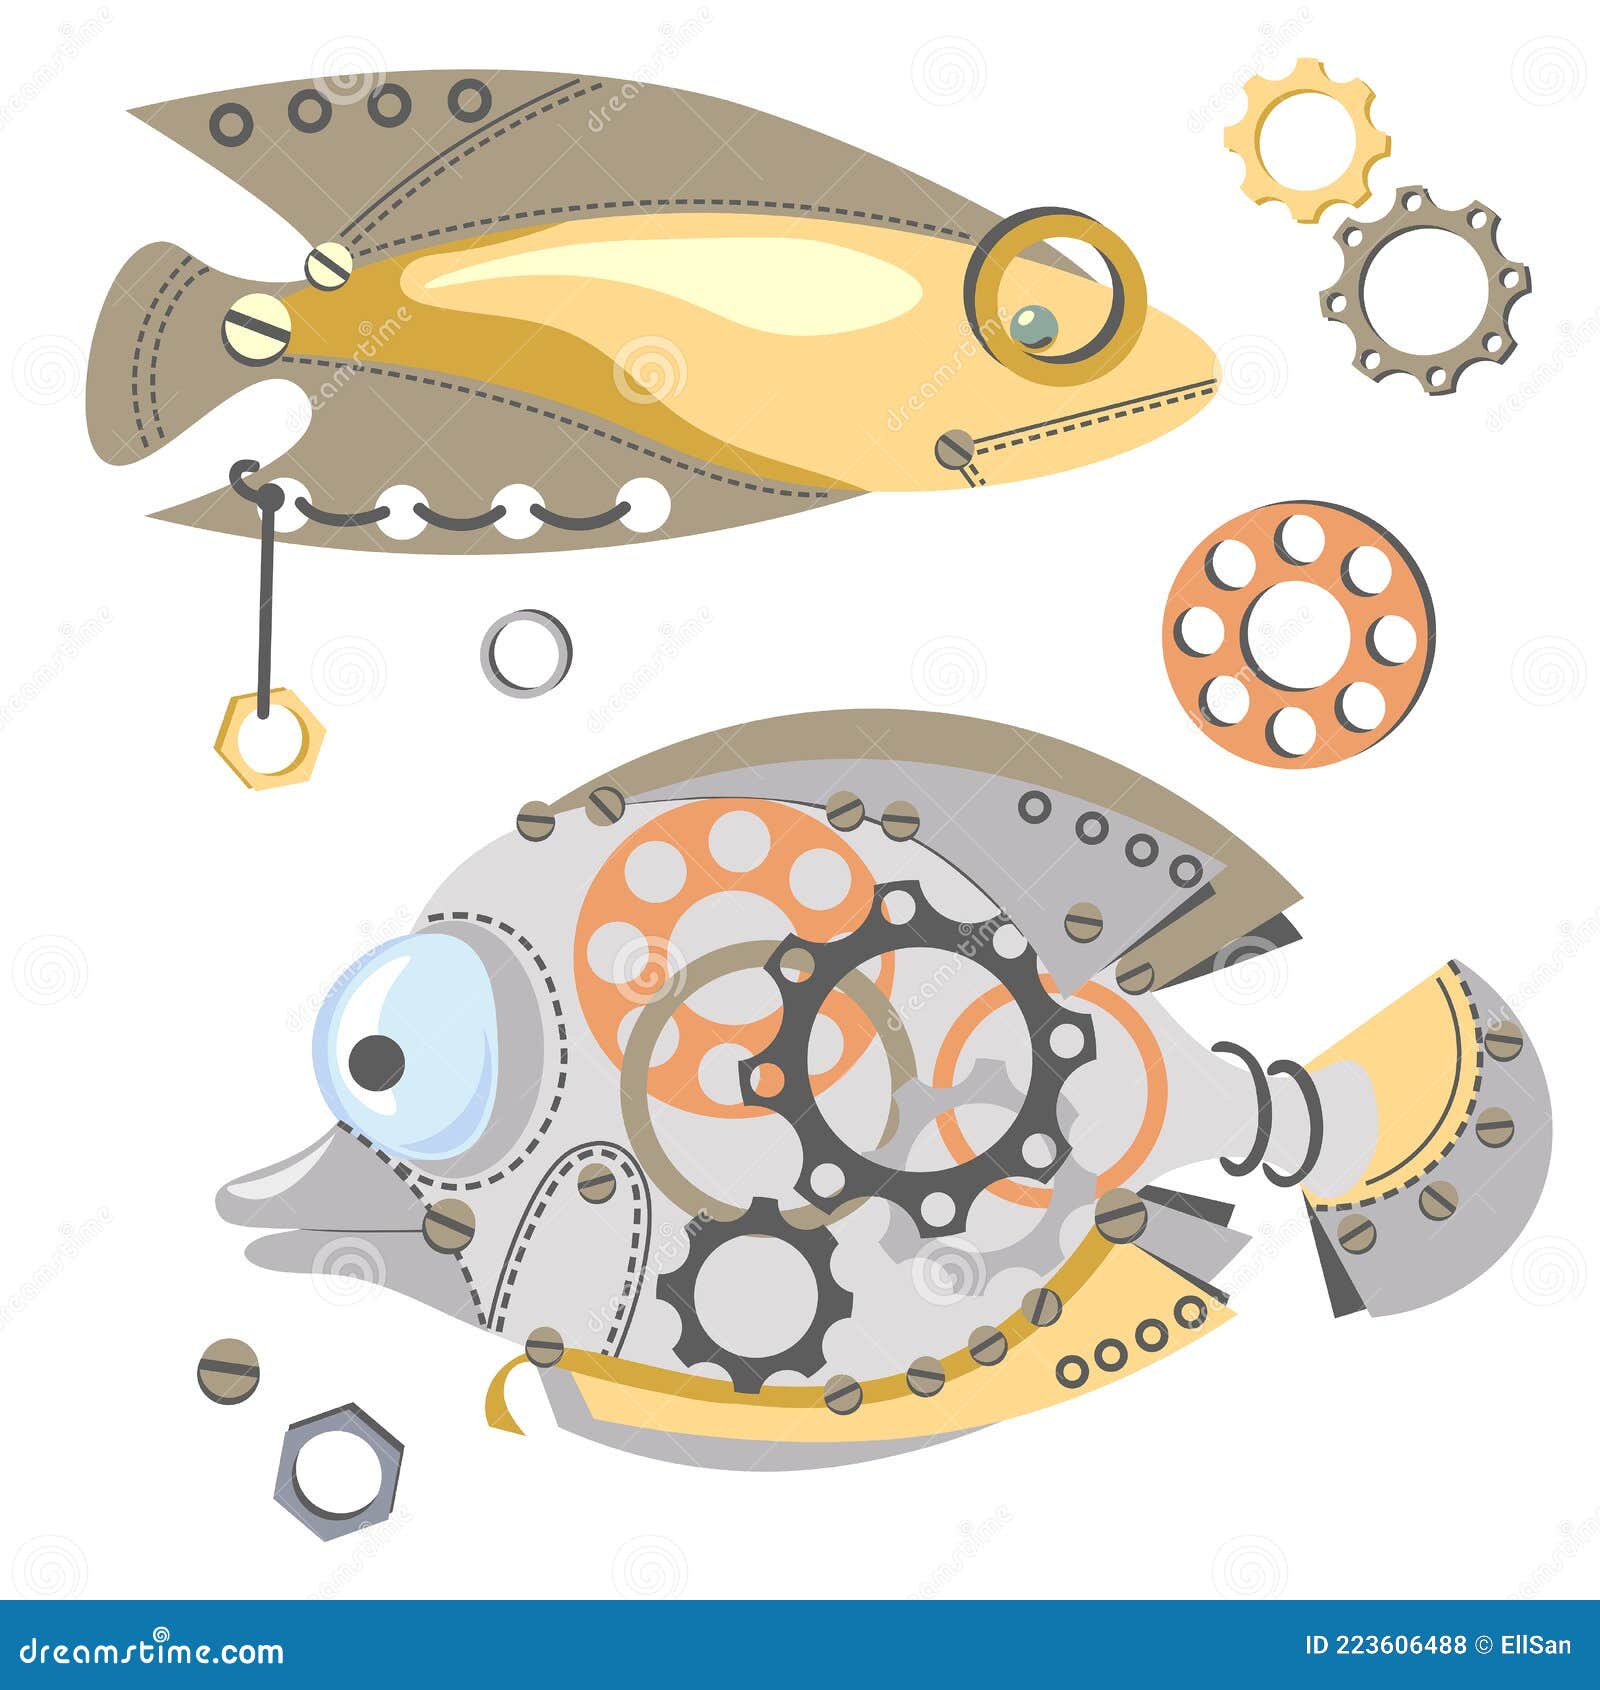 Fantastic Mechanical Fish. Cute Metal Fish with Gear Wheels, Metal Part,  Nails. Steampunk Style Stock Vector - Illustration of robot, industry:  223606488